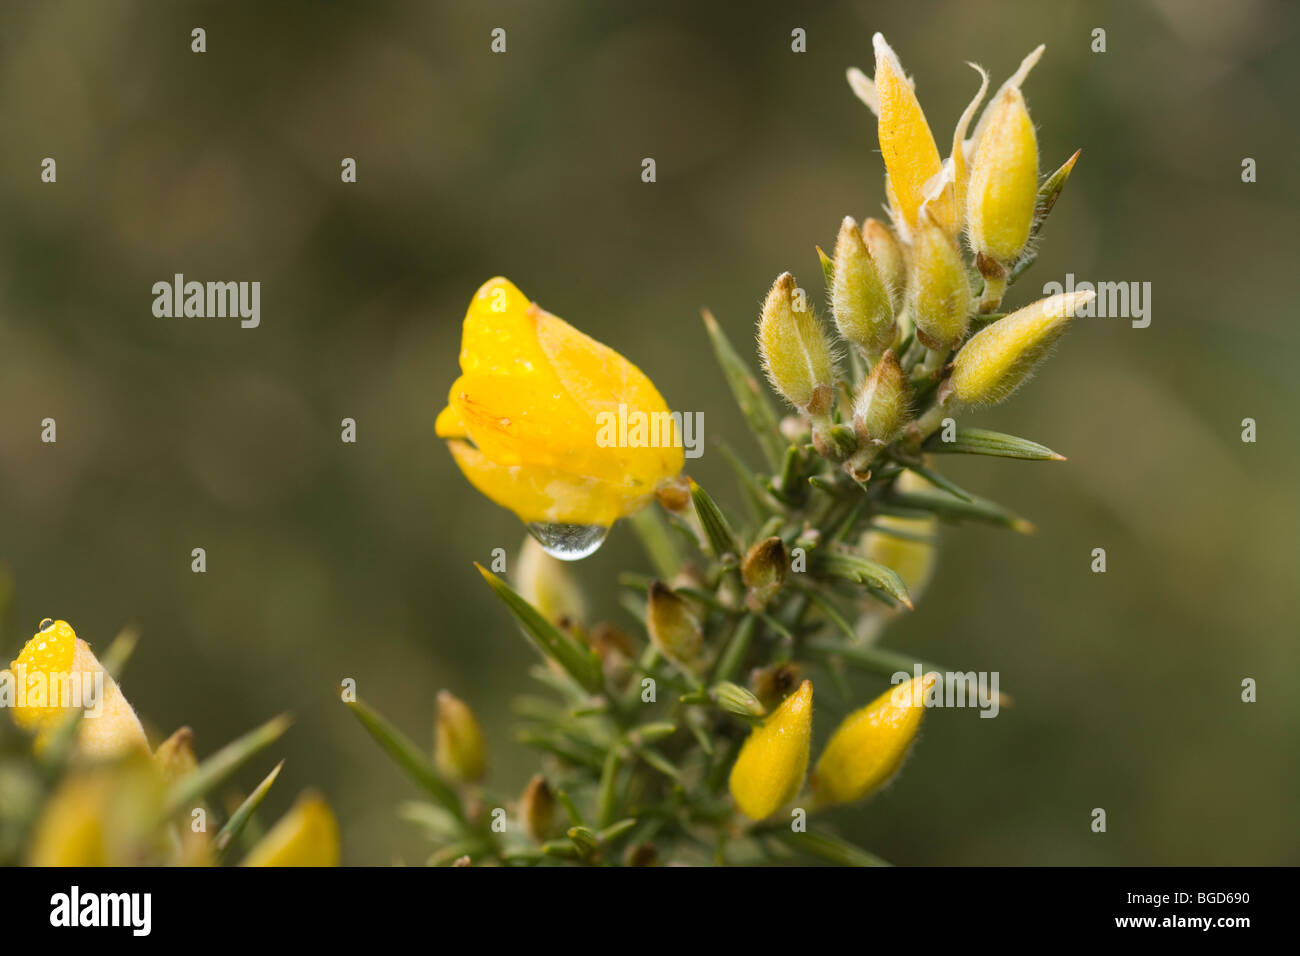 Vivid yellow flowers and rigid furrowed spines on leaves of Gorse (Ulex europaeus). Also called Furze and Whin. Stock Photo